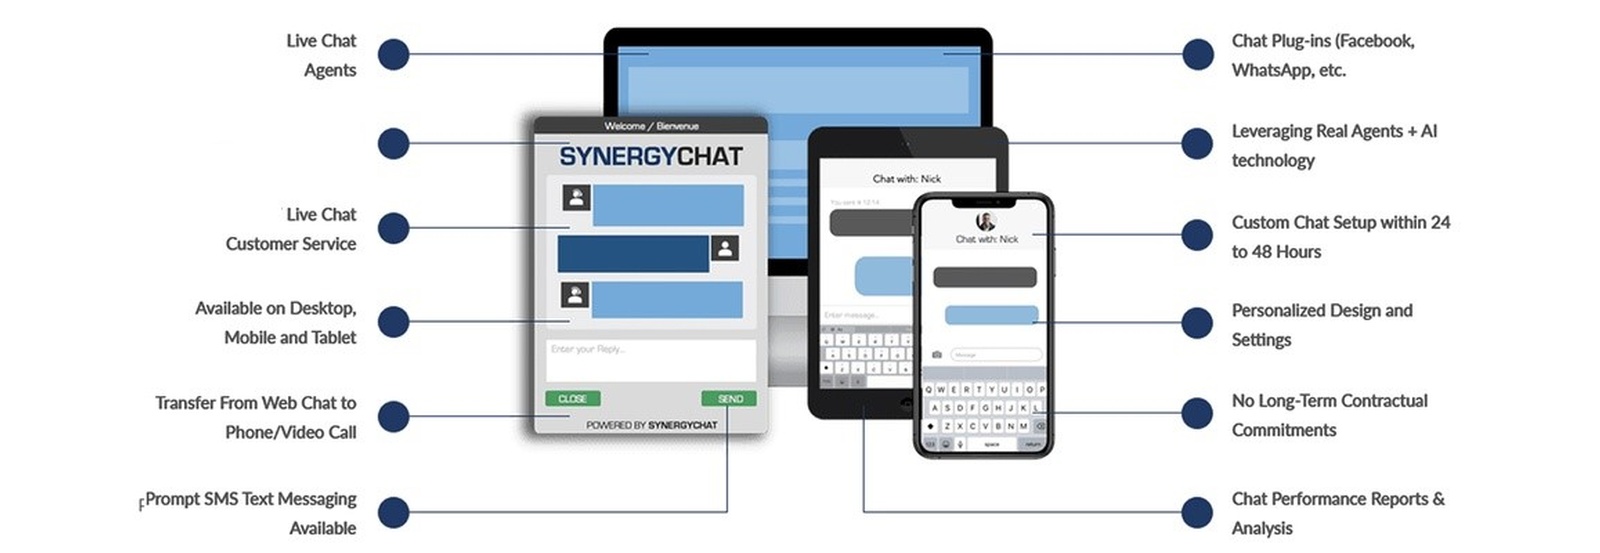 Why Synergychat?